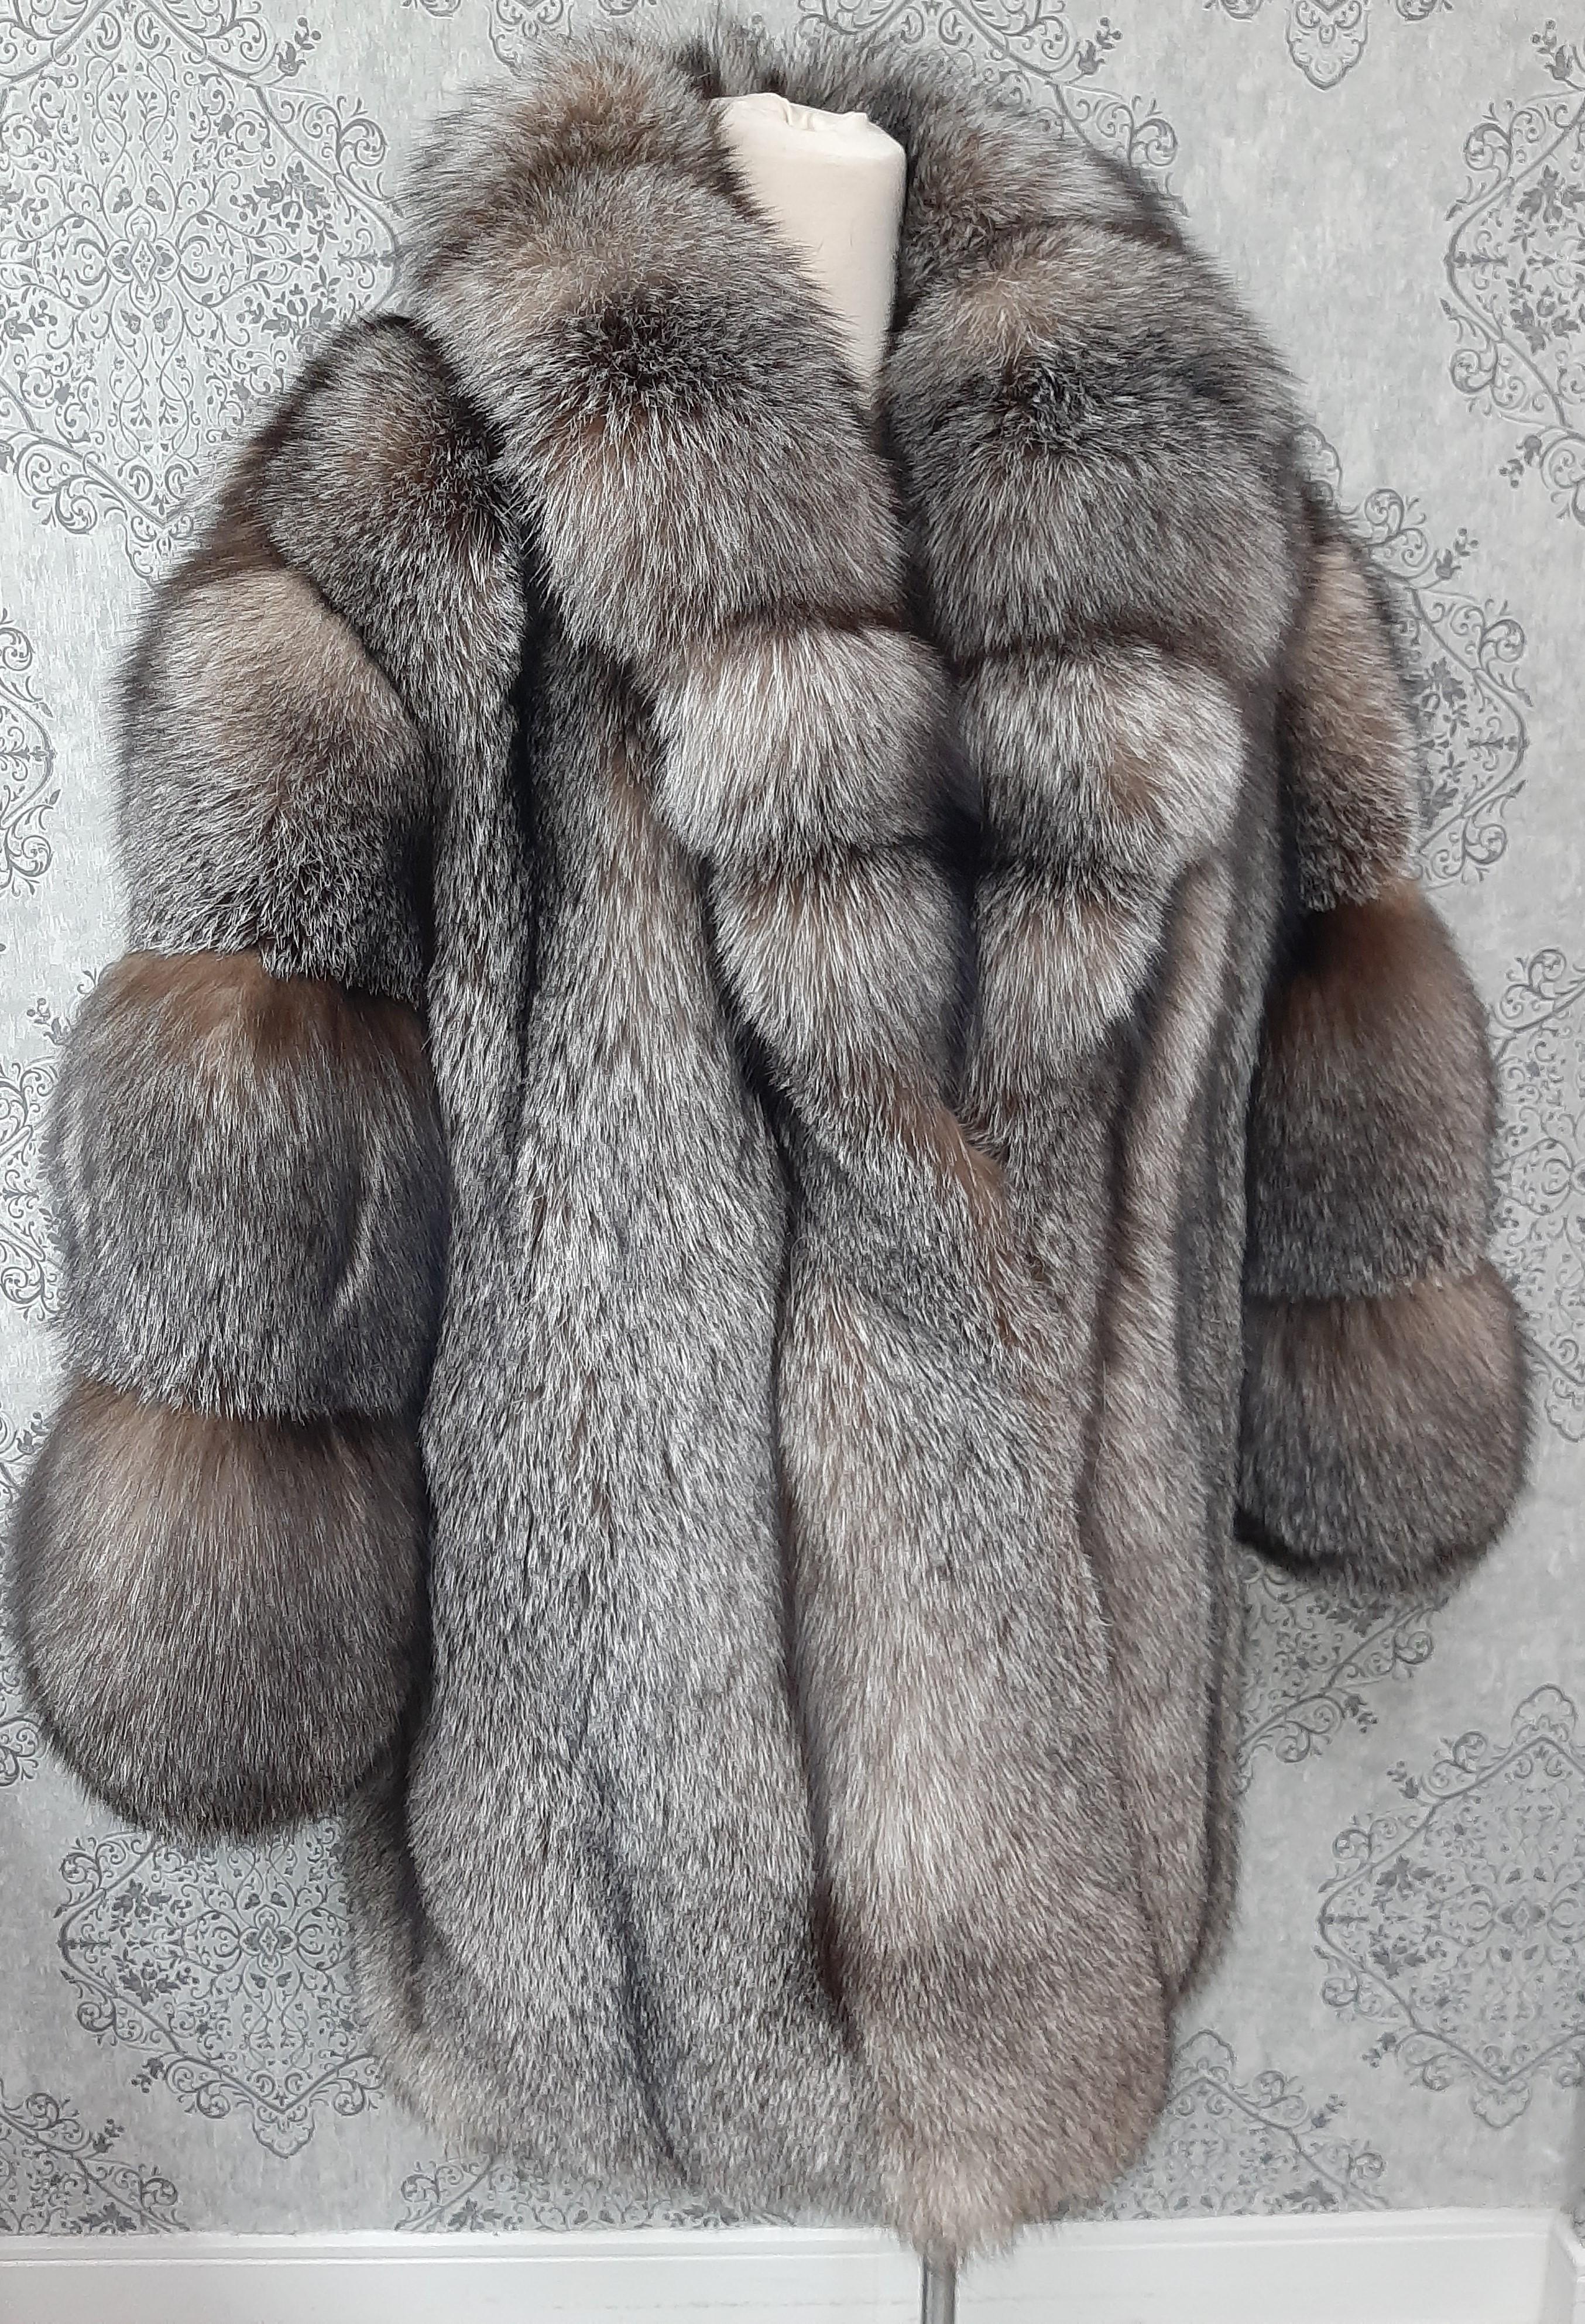 PRODUCT DESCRIPTION:

Brand new luxurious crystal Fox fur coat 

Condition: Brand New

Closure: german hook

Color: crystal

Material:  Fox

Garment type: Coat

Sleeves: Straight

Pockets: two pockets

Collar: Portrait

Lining: Shirred Silk